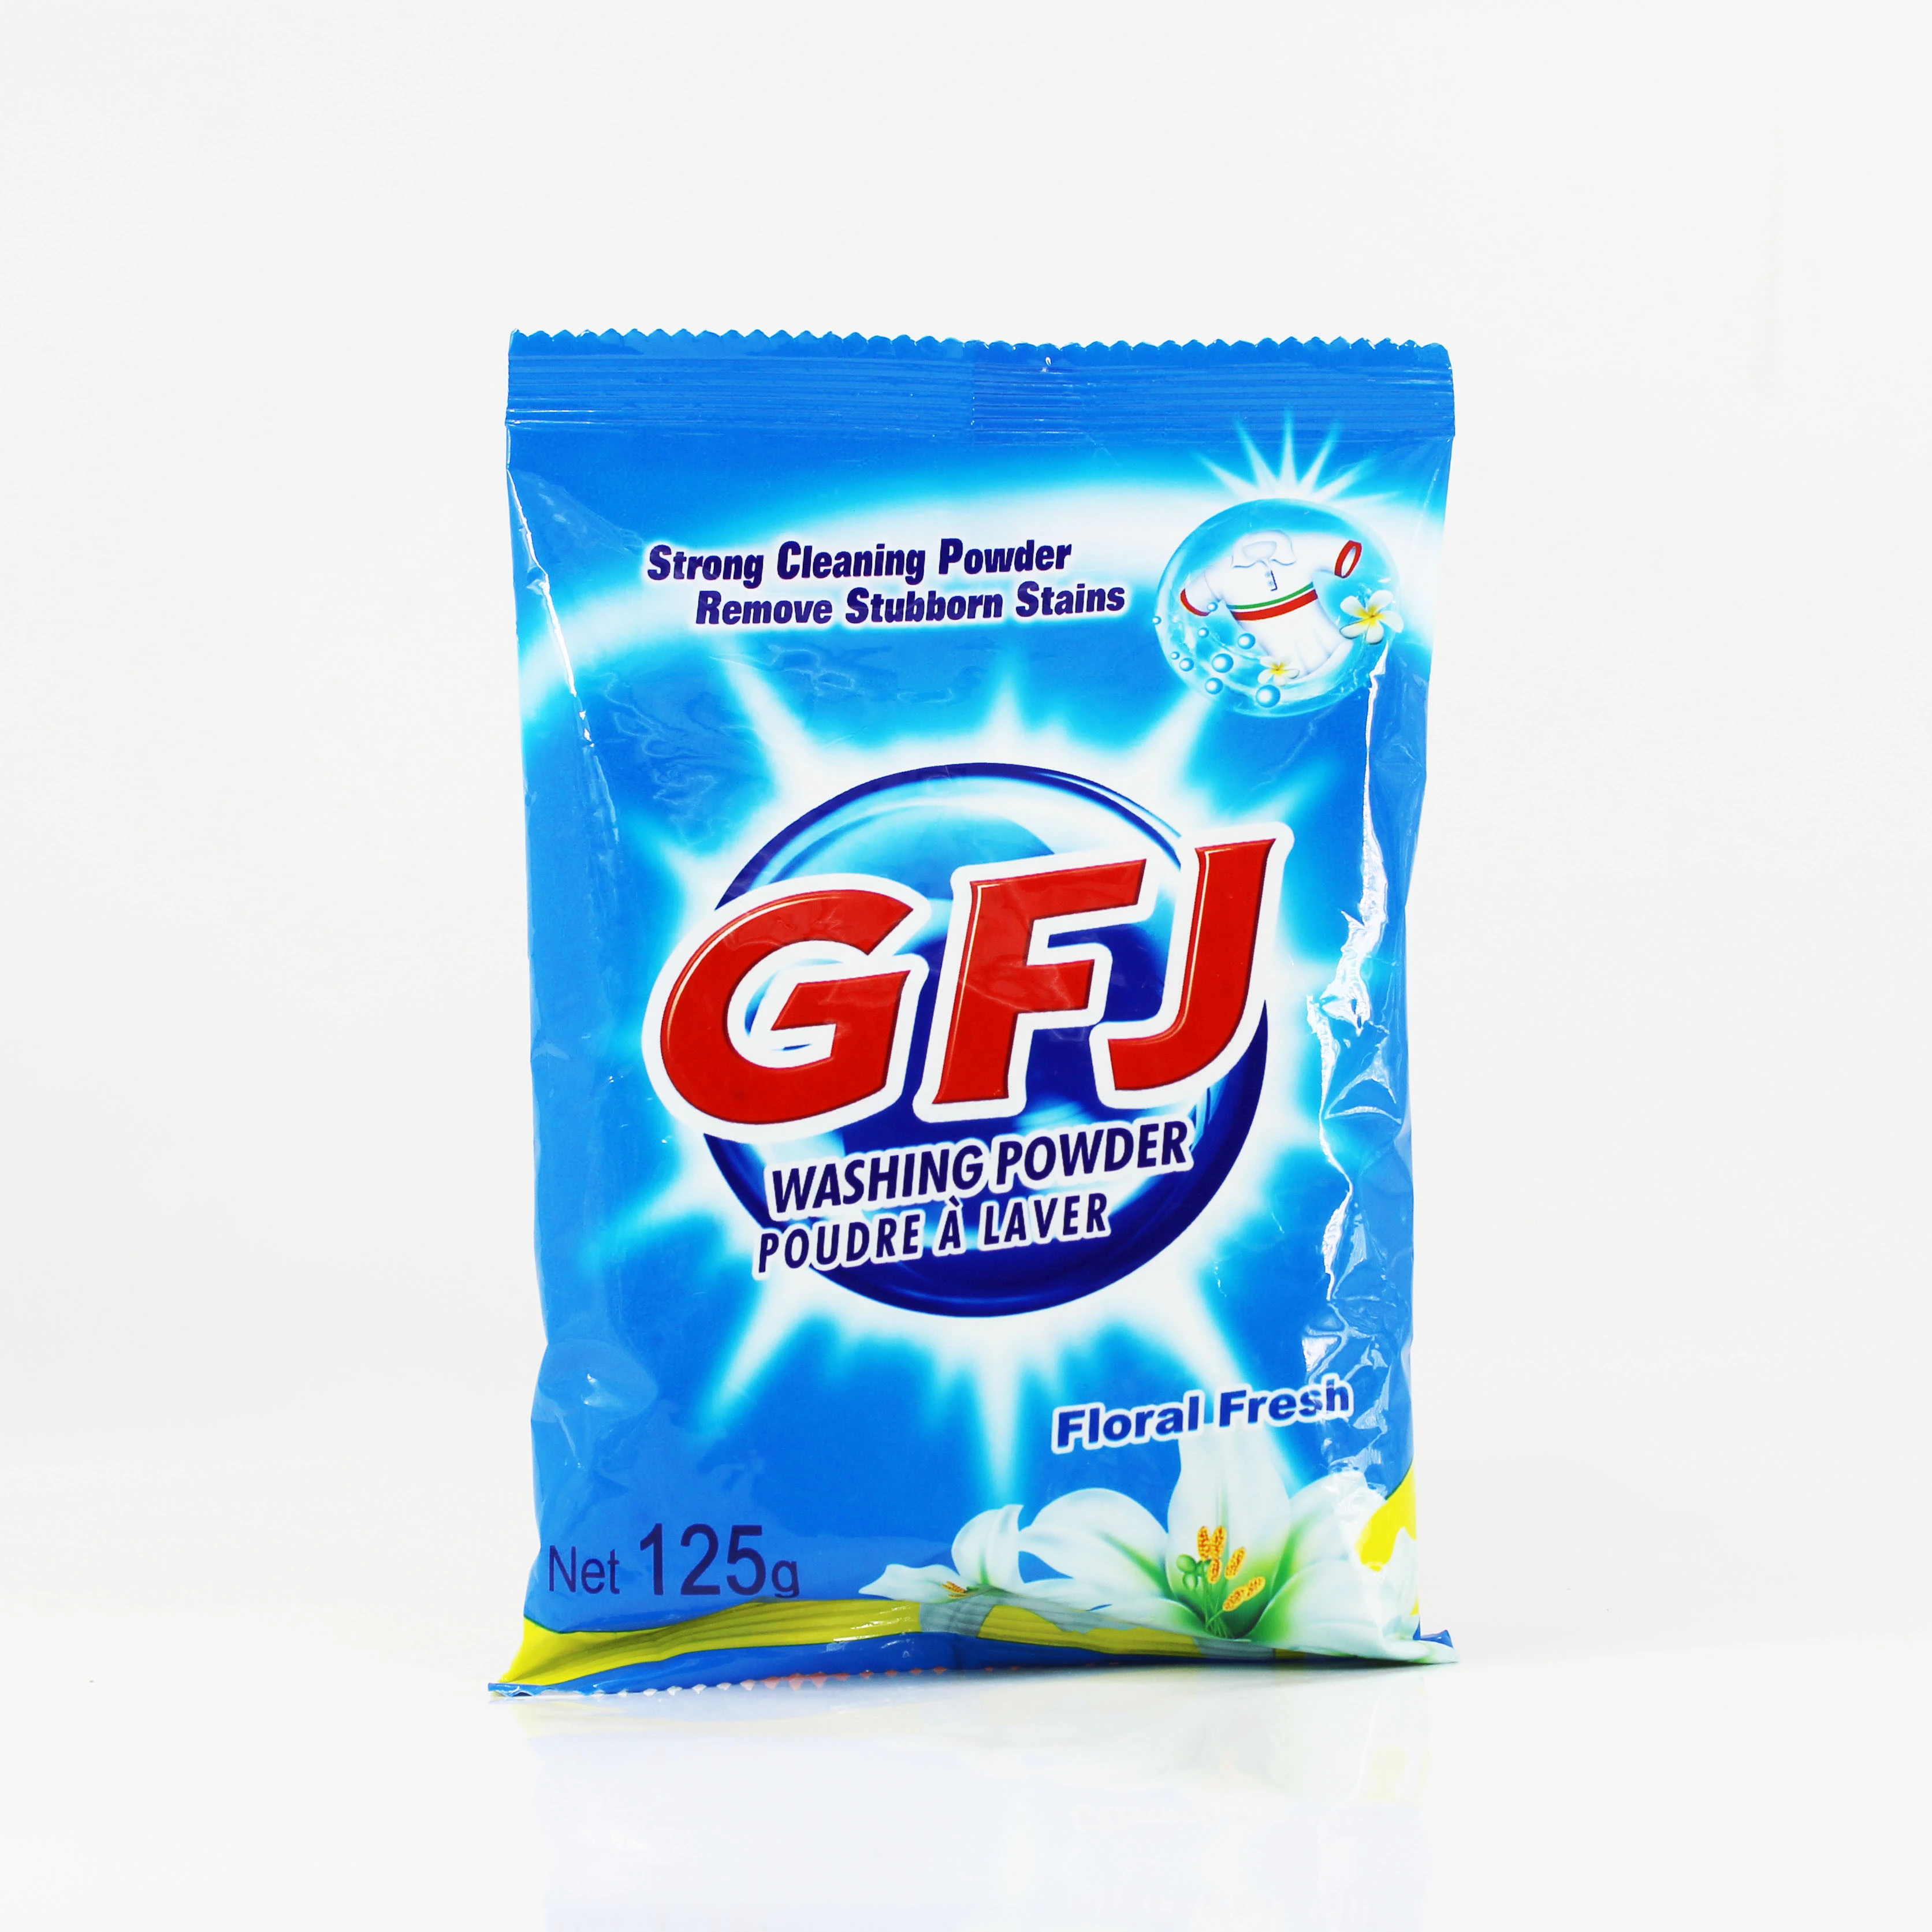 Designed package available laundry detergent / soap / washing powder